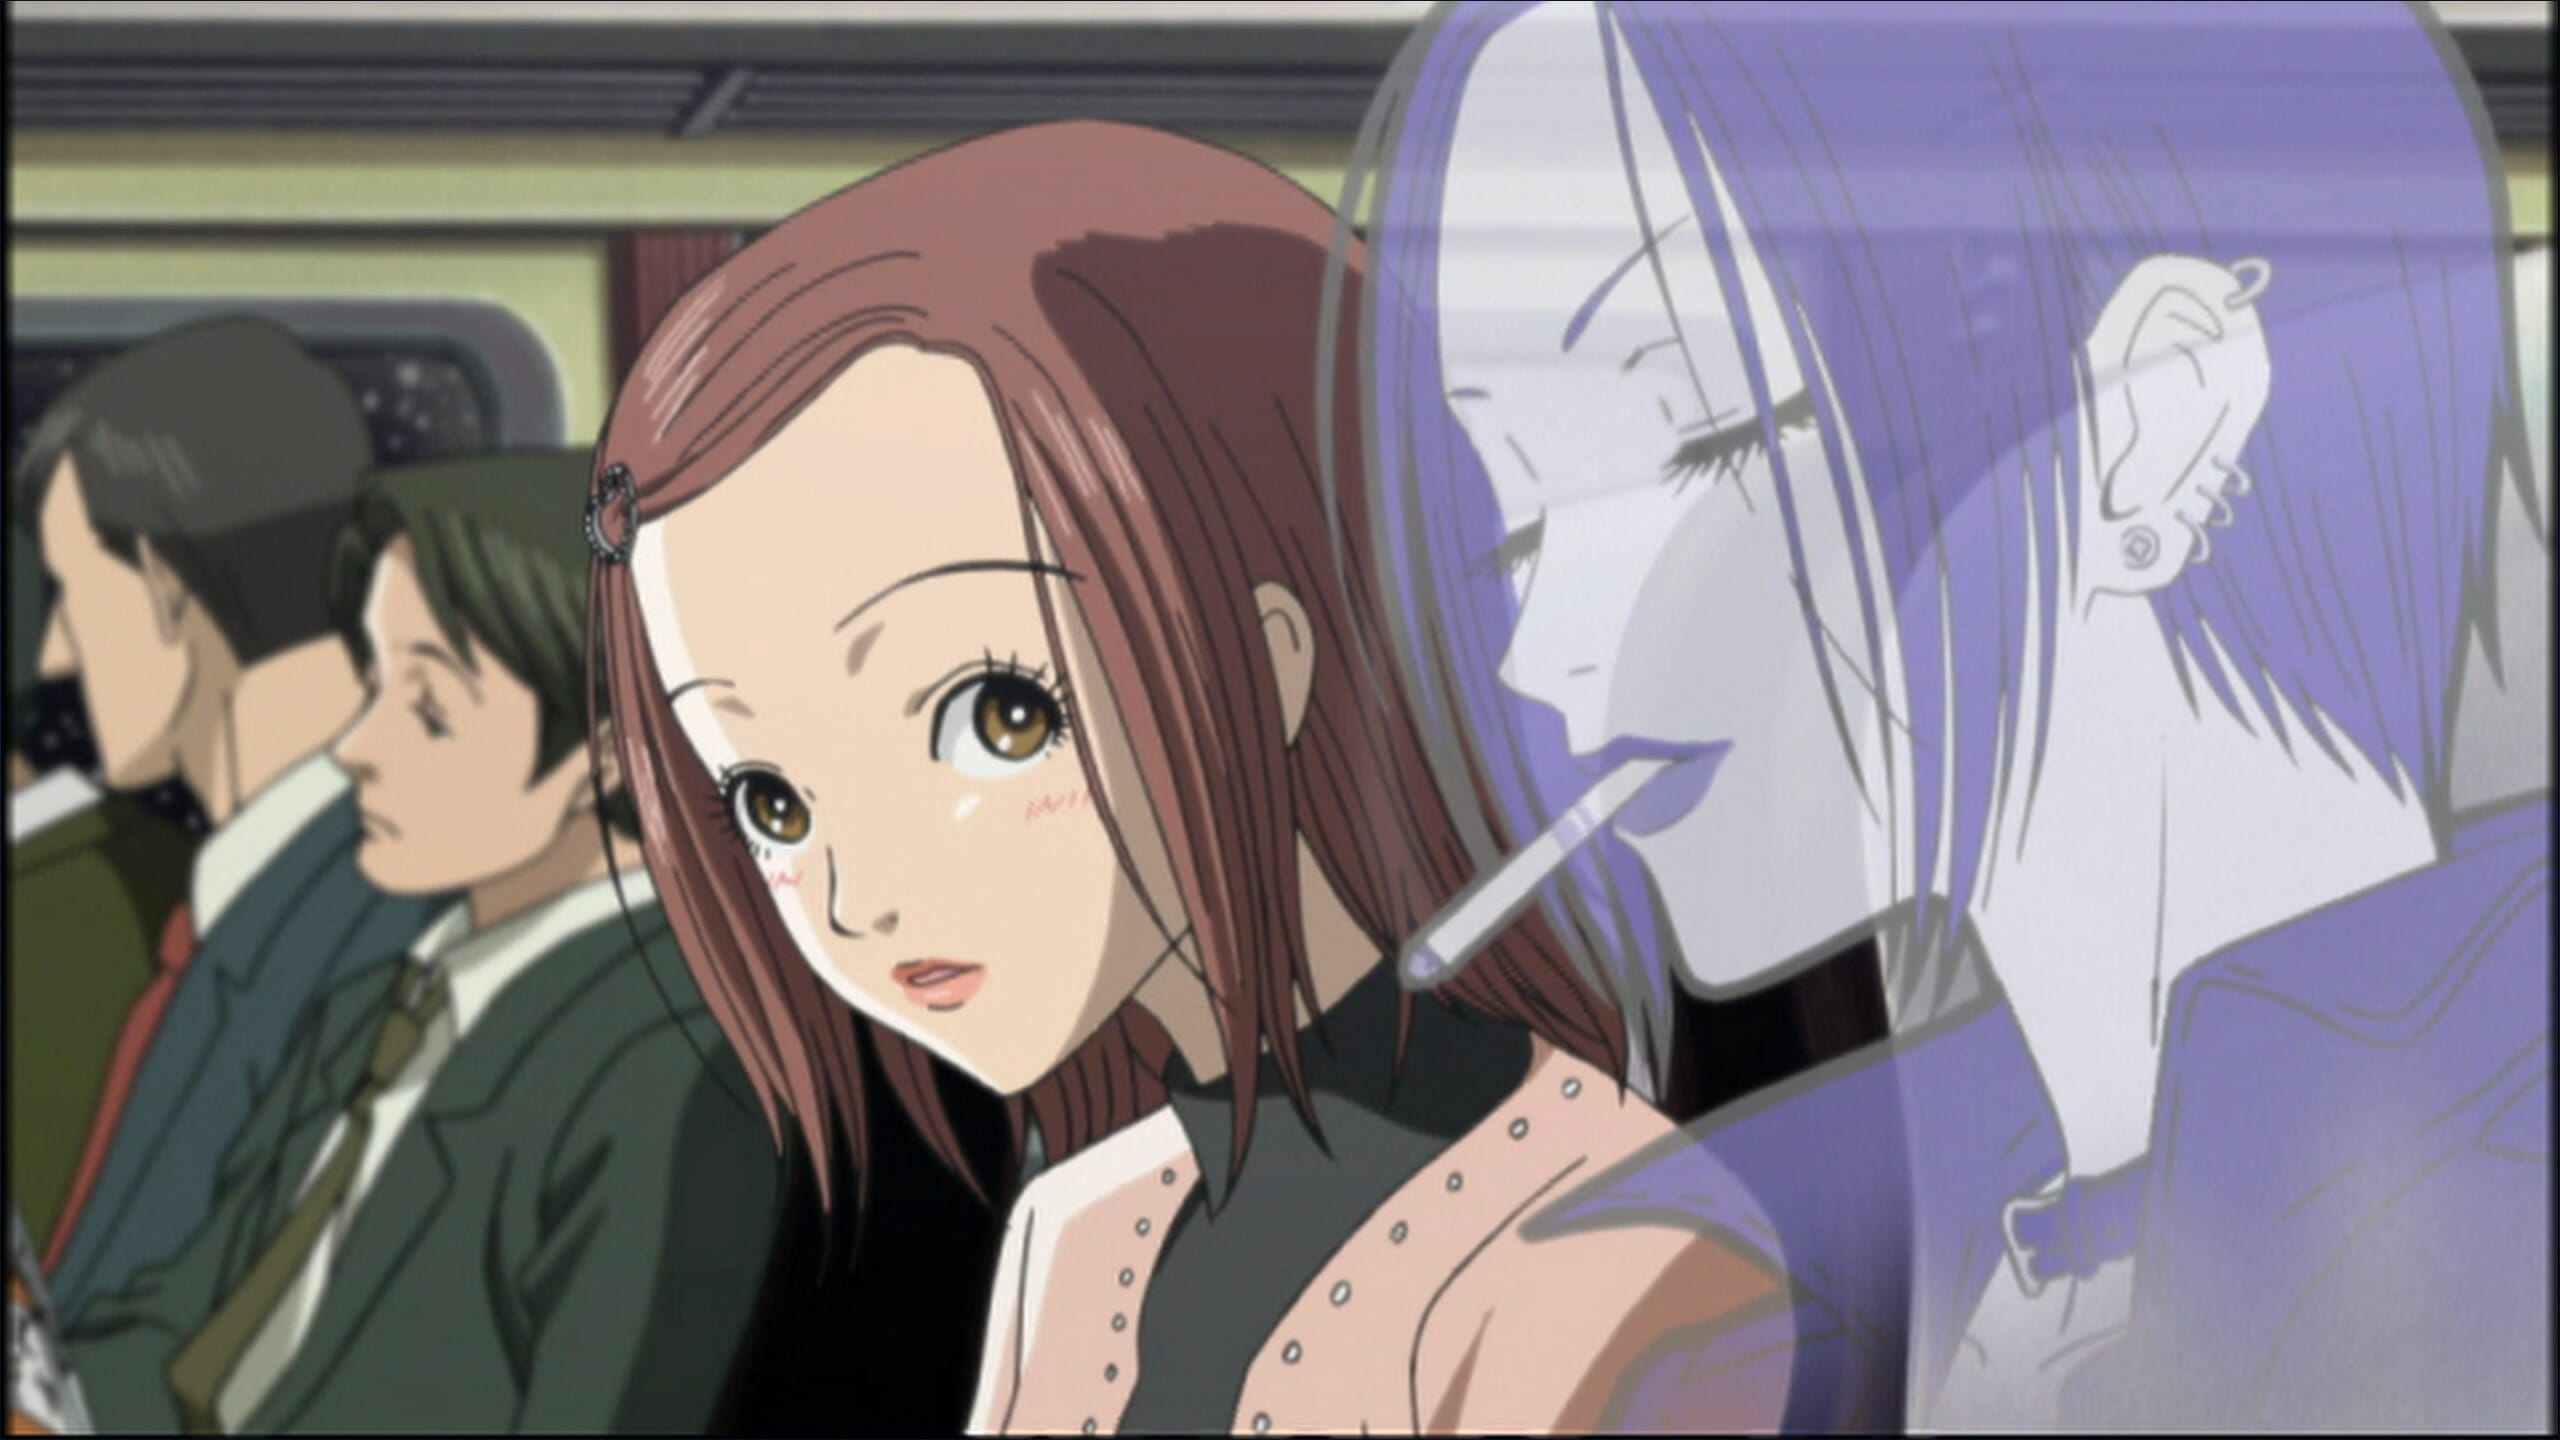 Still from the Nana anime, which depicts a brown-haired woman as she look sat the spectral image of a raven-haired woman who is smoking a cigarette.